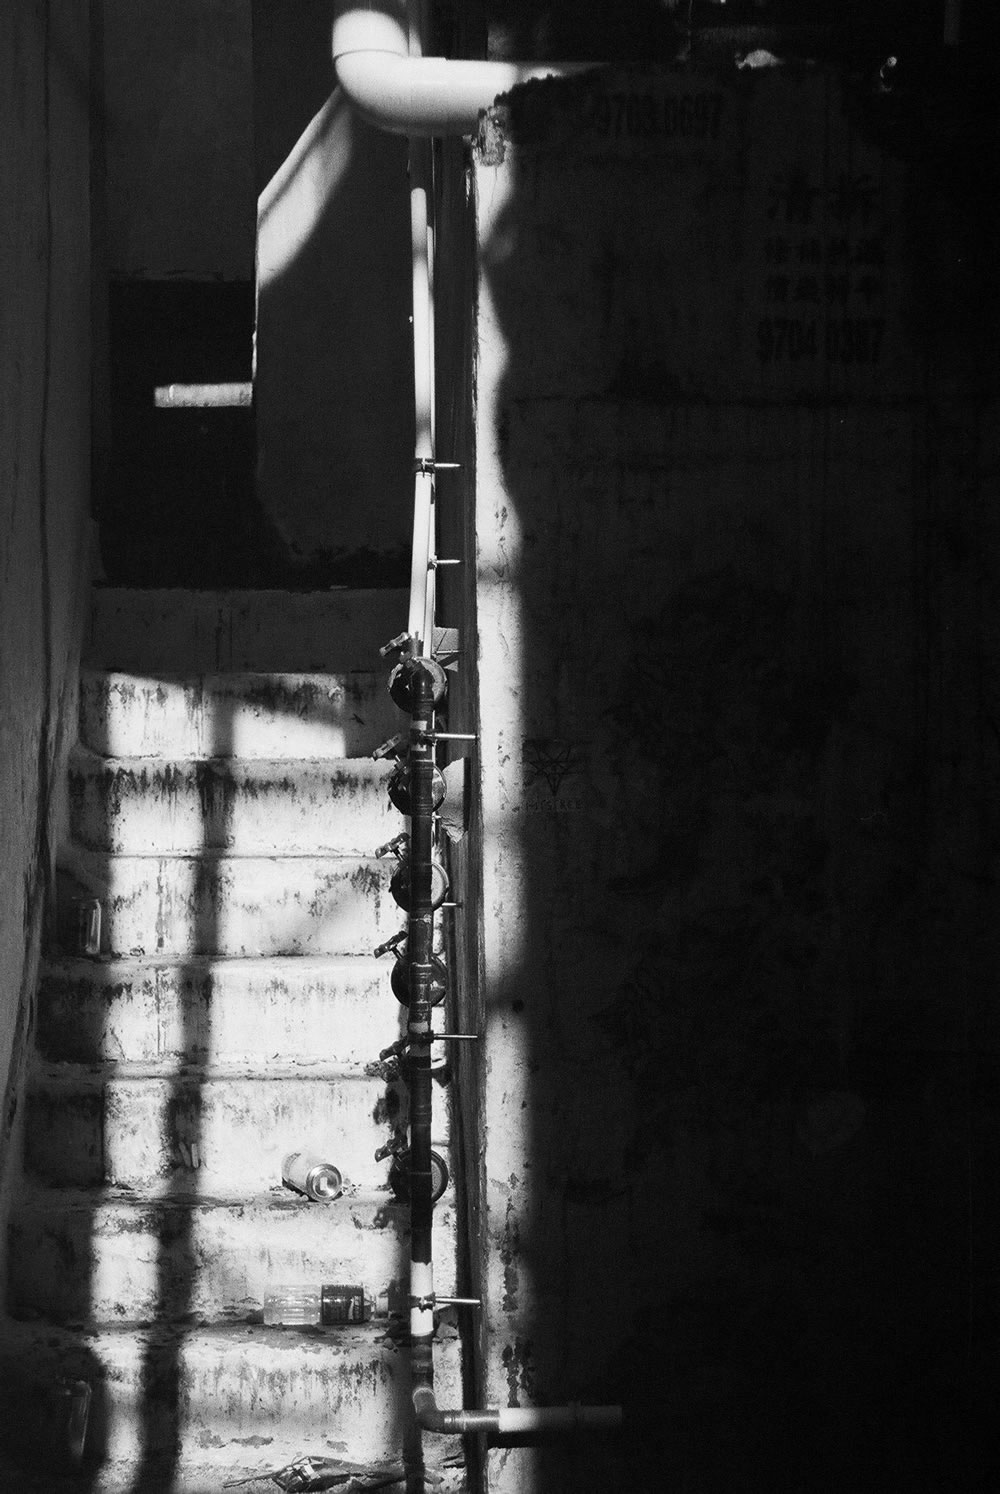 Take the stairs - Fuji Neopan 400 shot at EI 400. Black and white negative film in 35mm format.